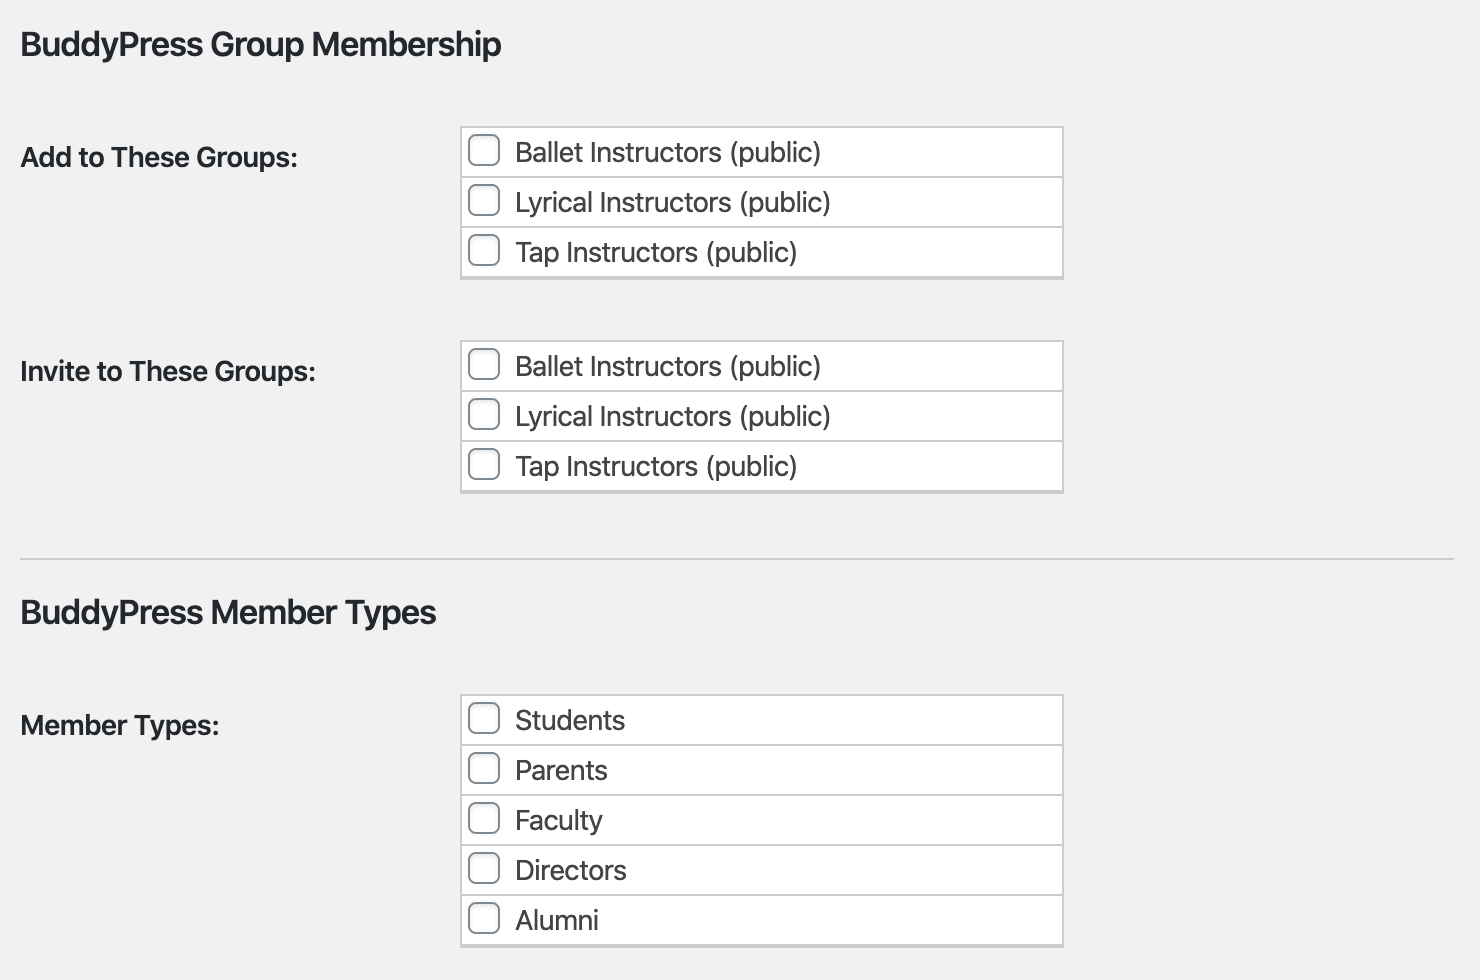 **Group and Member Type Settings** - Add or Invite Members to Groups and Assign Member Types by Membership Level under Memberships > Settings > Memberships Levels > Edit.